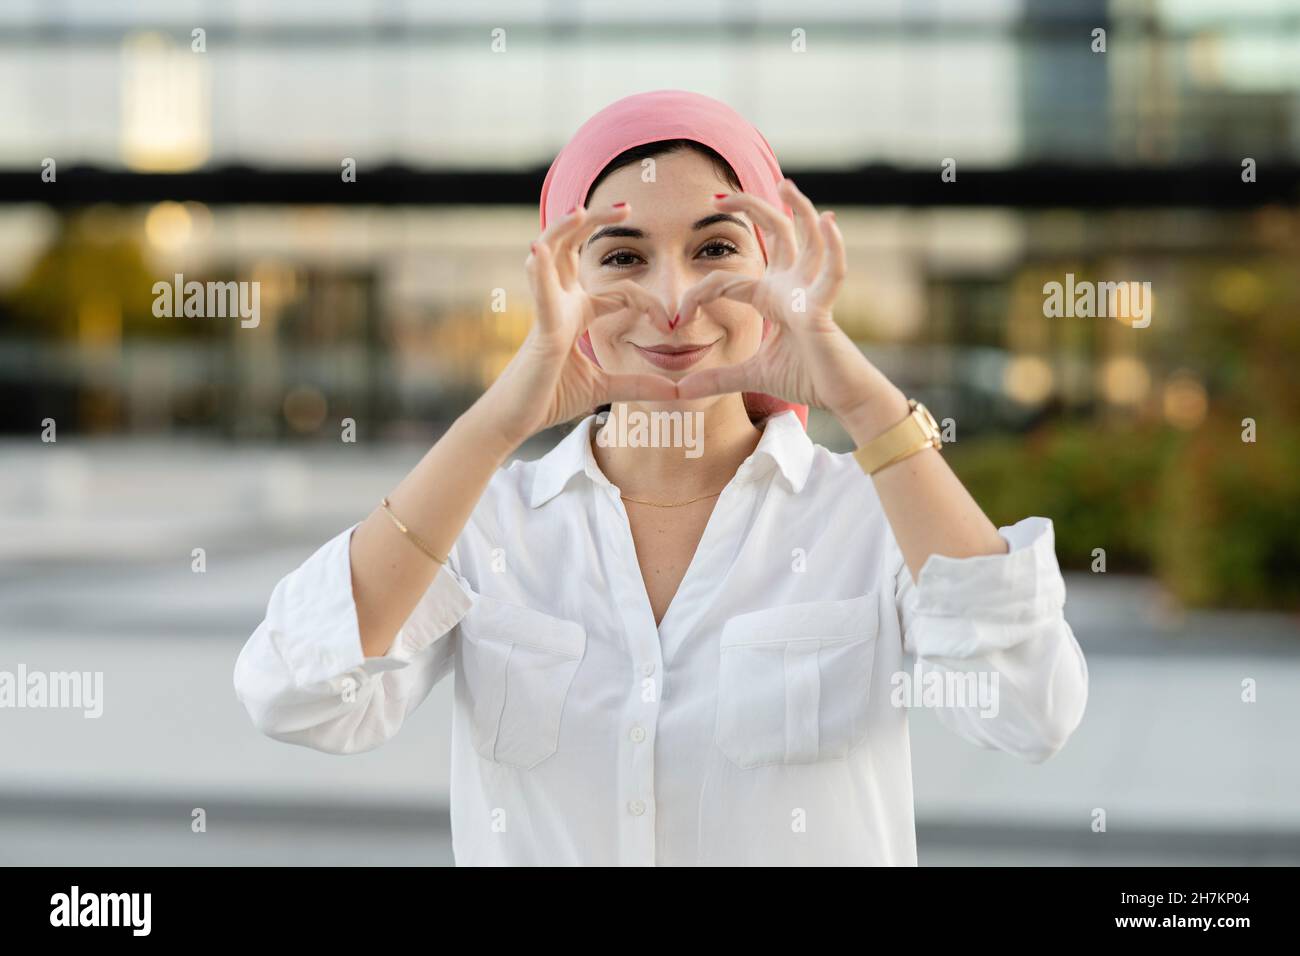 Young woman wearing headscarf with hands behind head Stock Photo